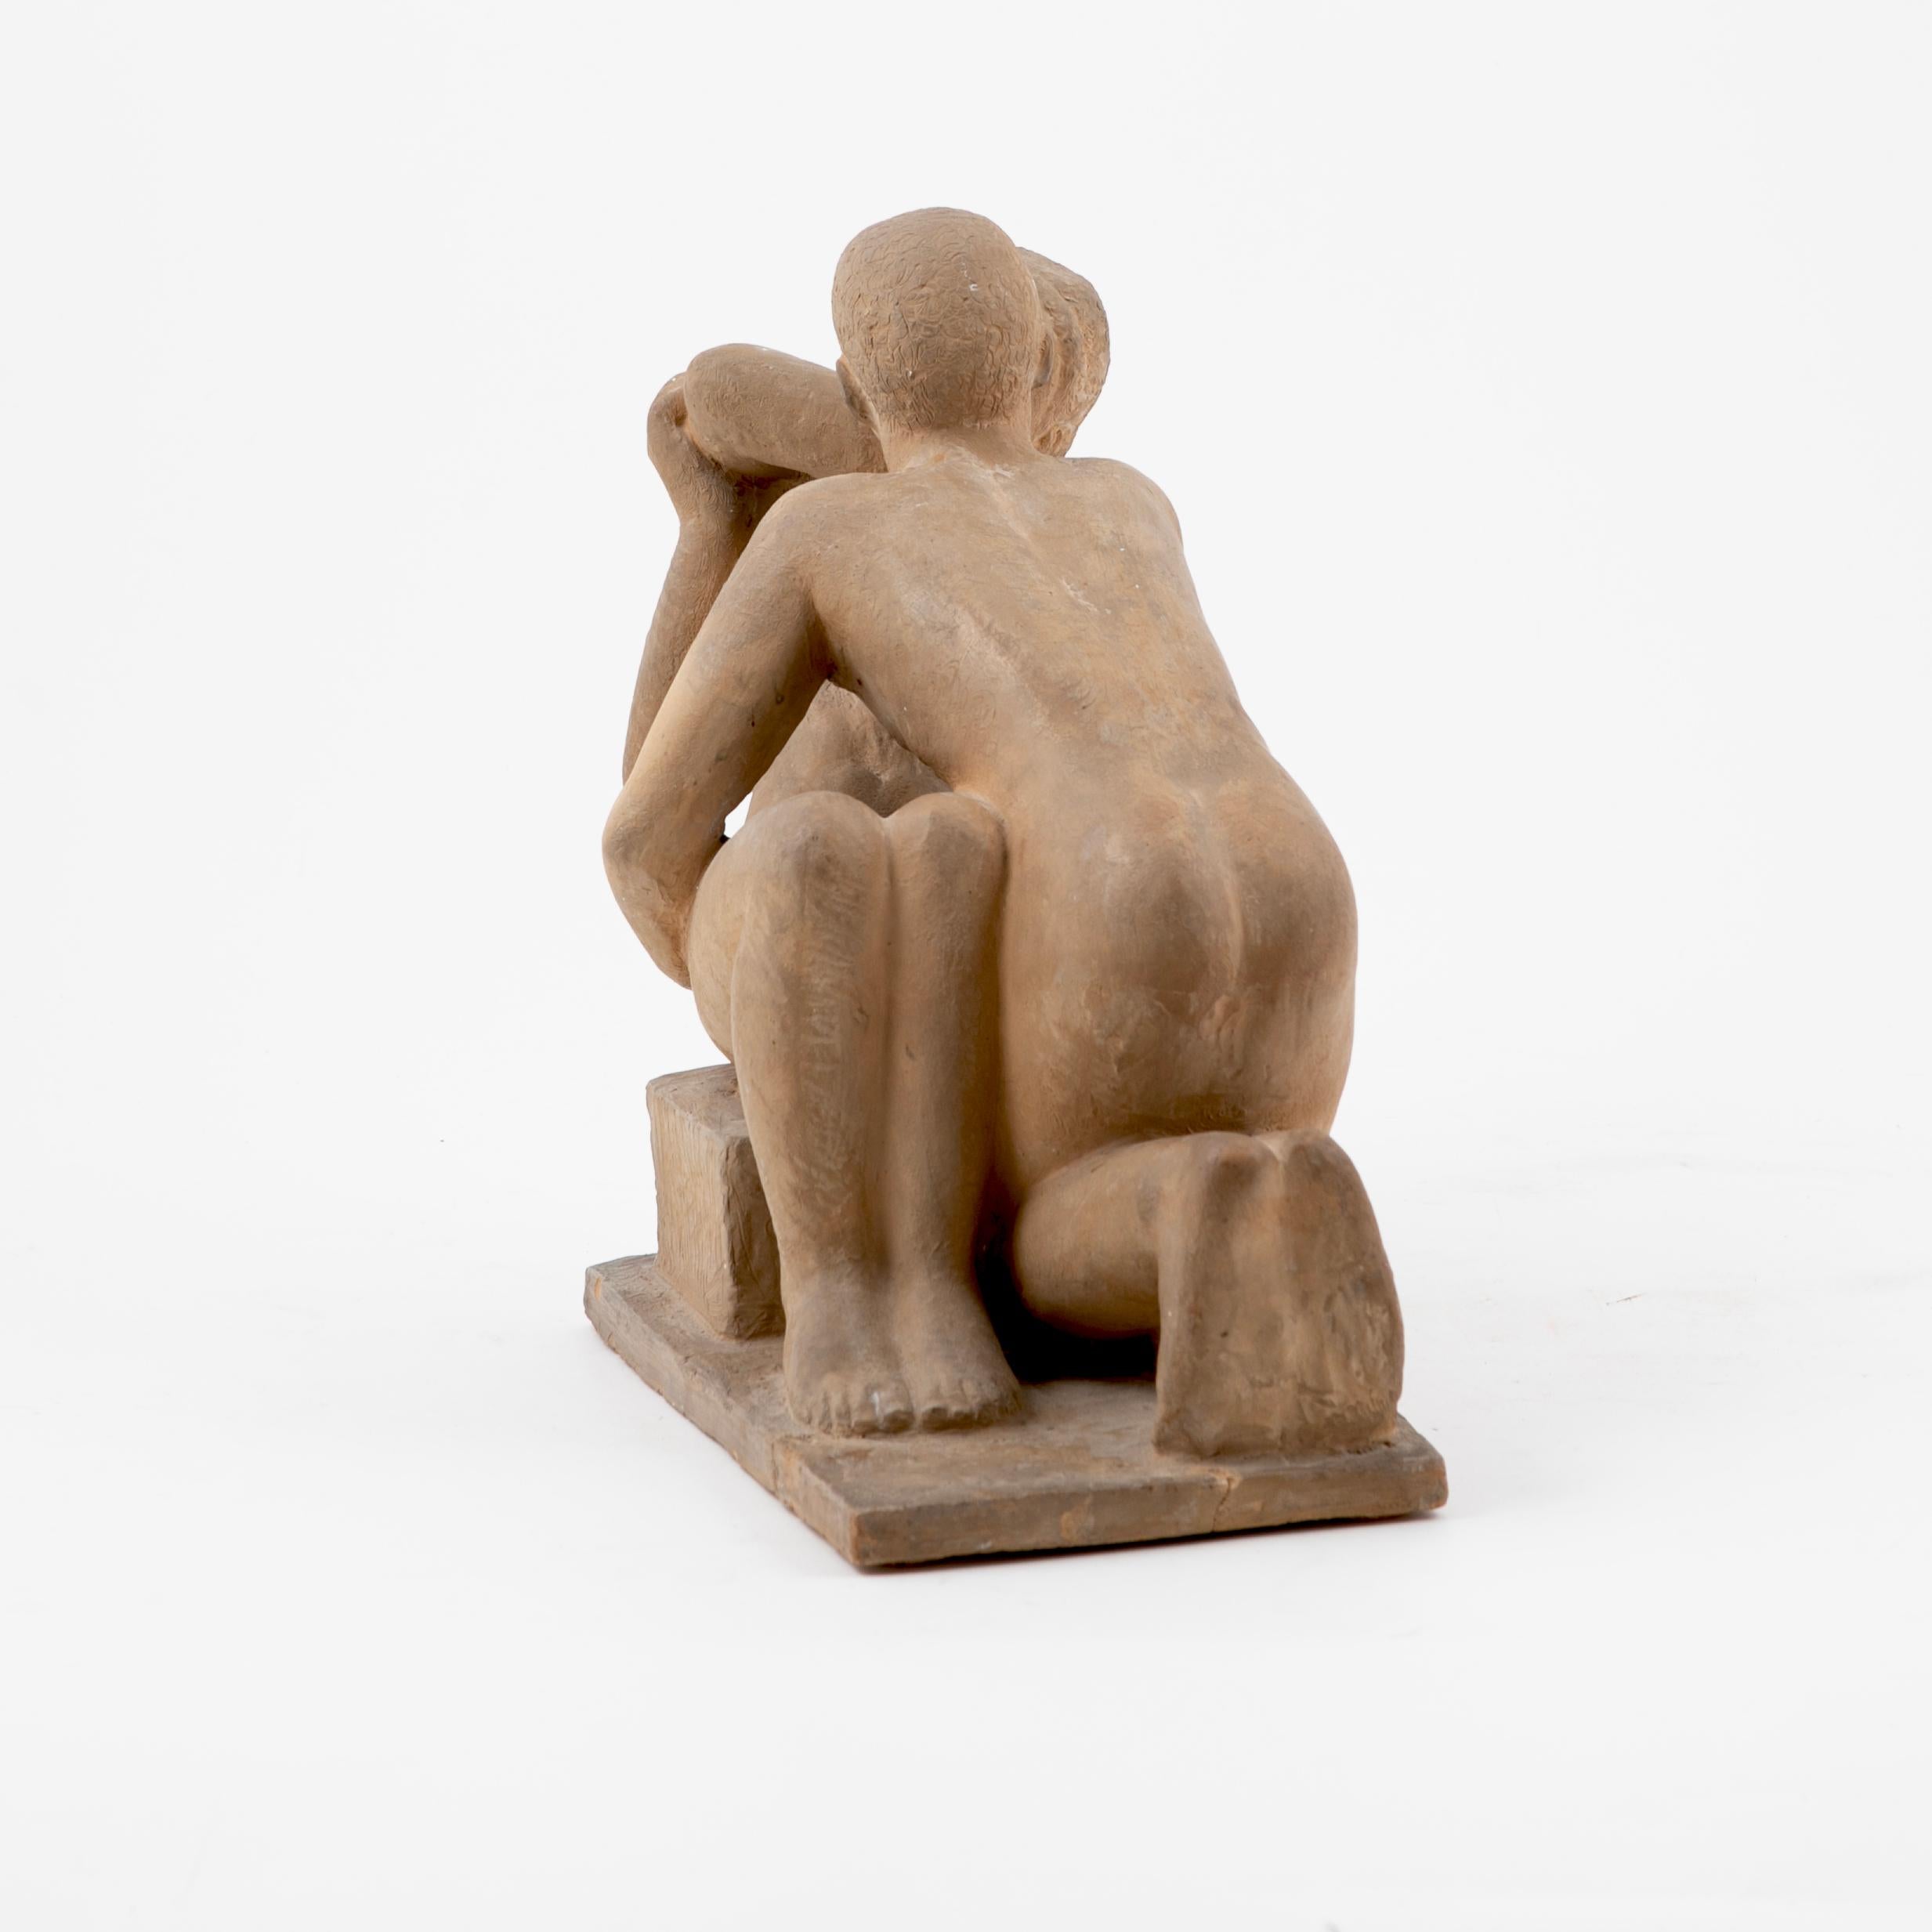 A sculpture made in fired clay depicting an erotic couple.
Titled: No 1.
Signed Gerhard Henning, 1927

NB: The plinth has been repaired, the sculpture itself is in mint condition.